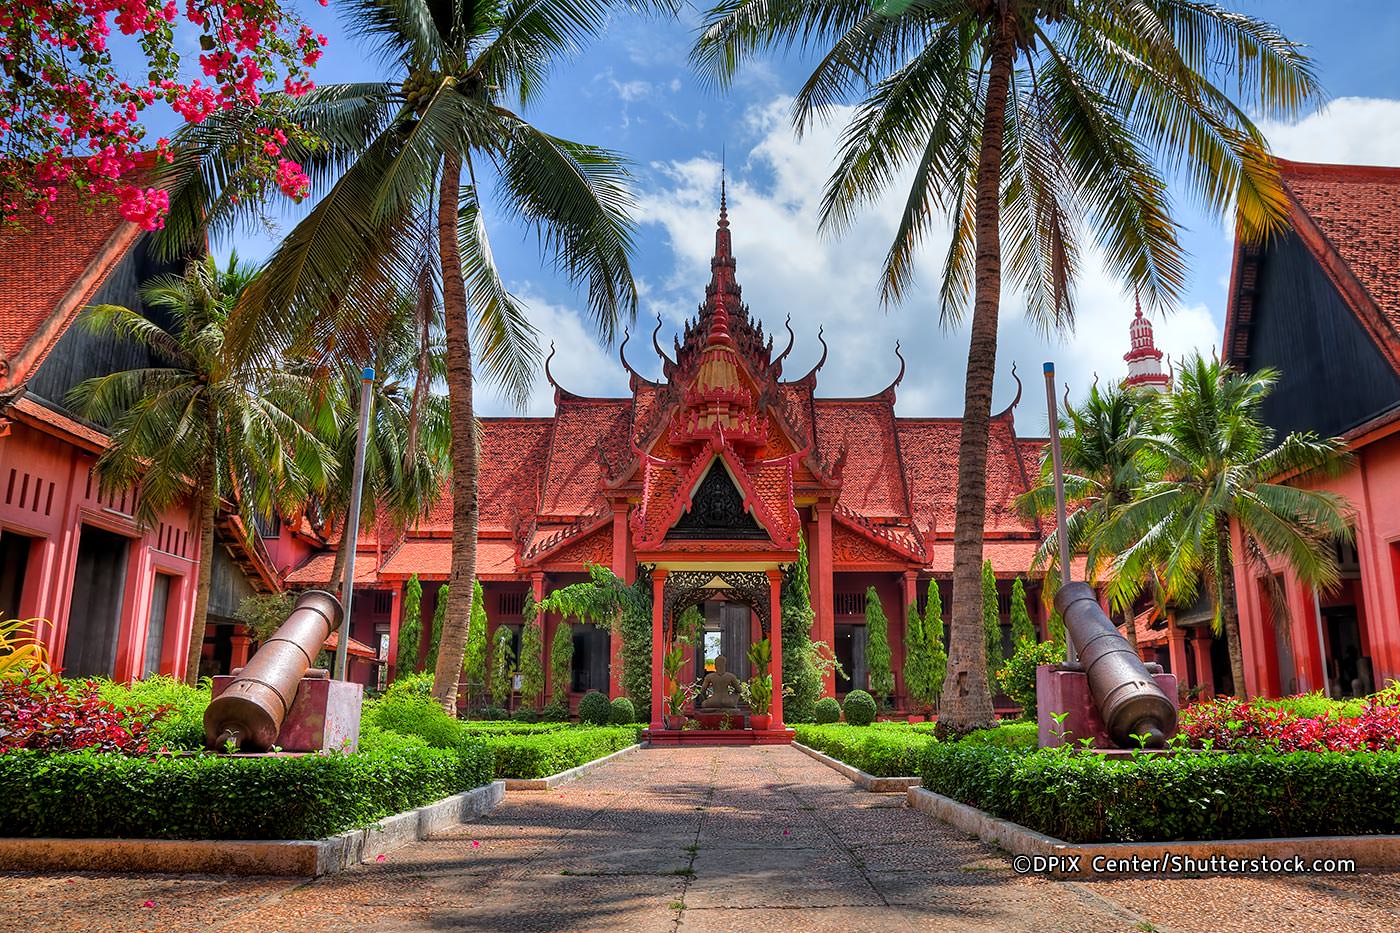 What to see in Phnom Penh